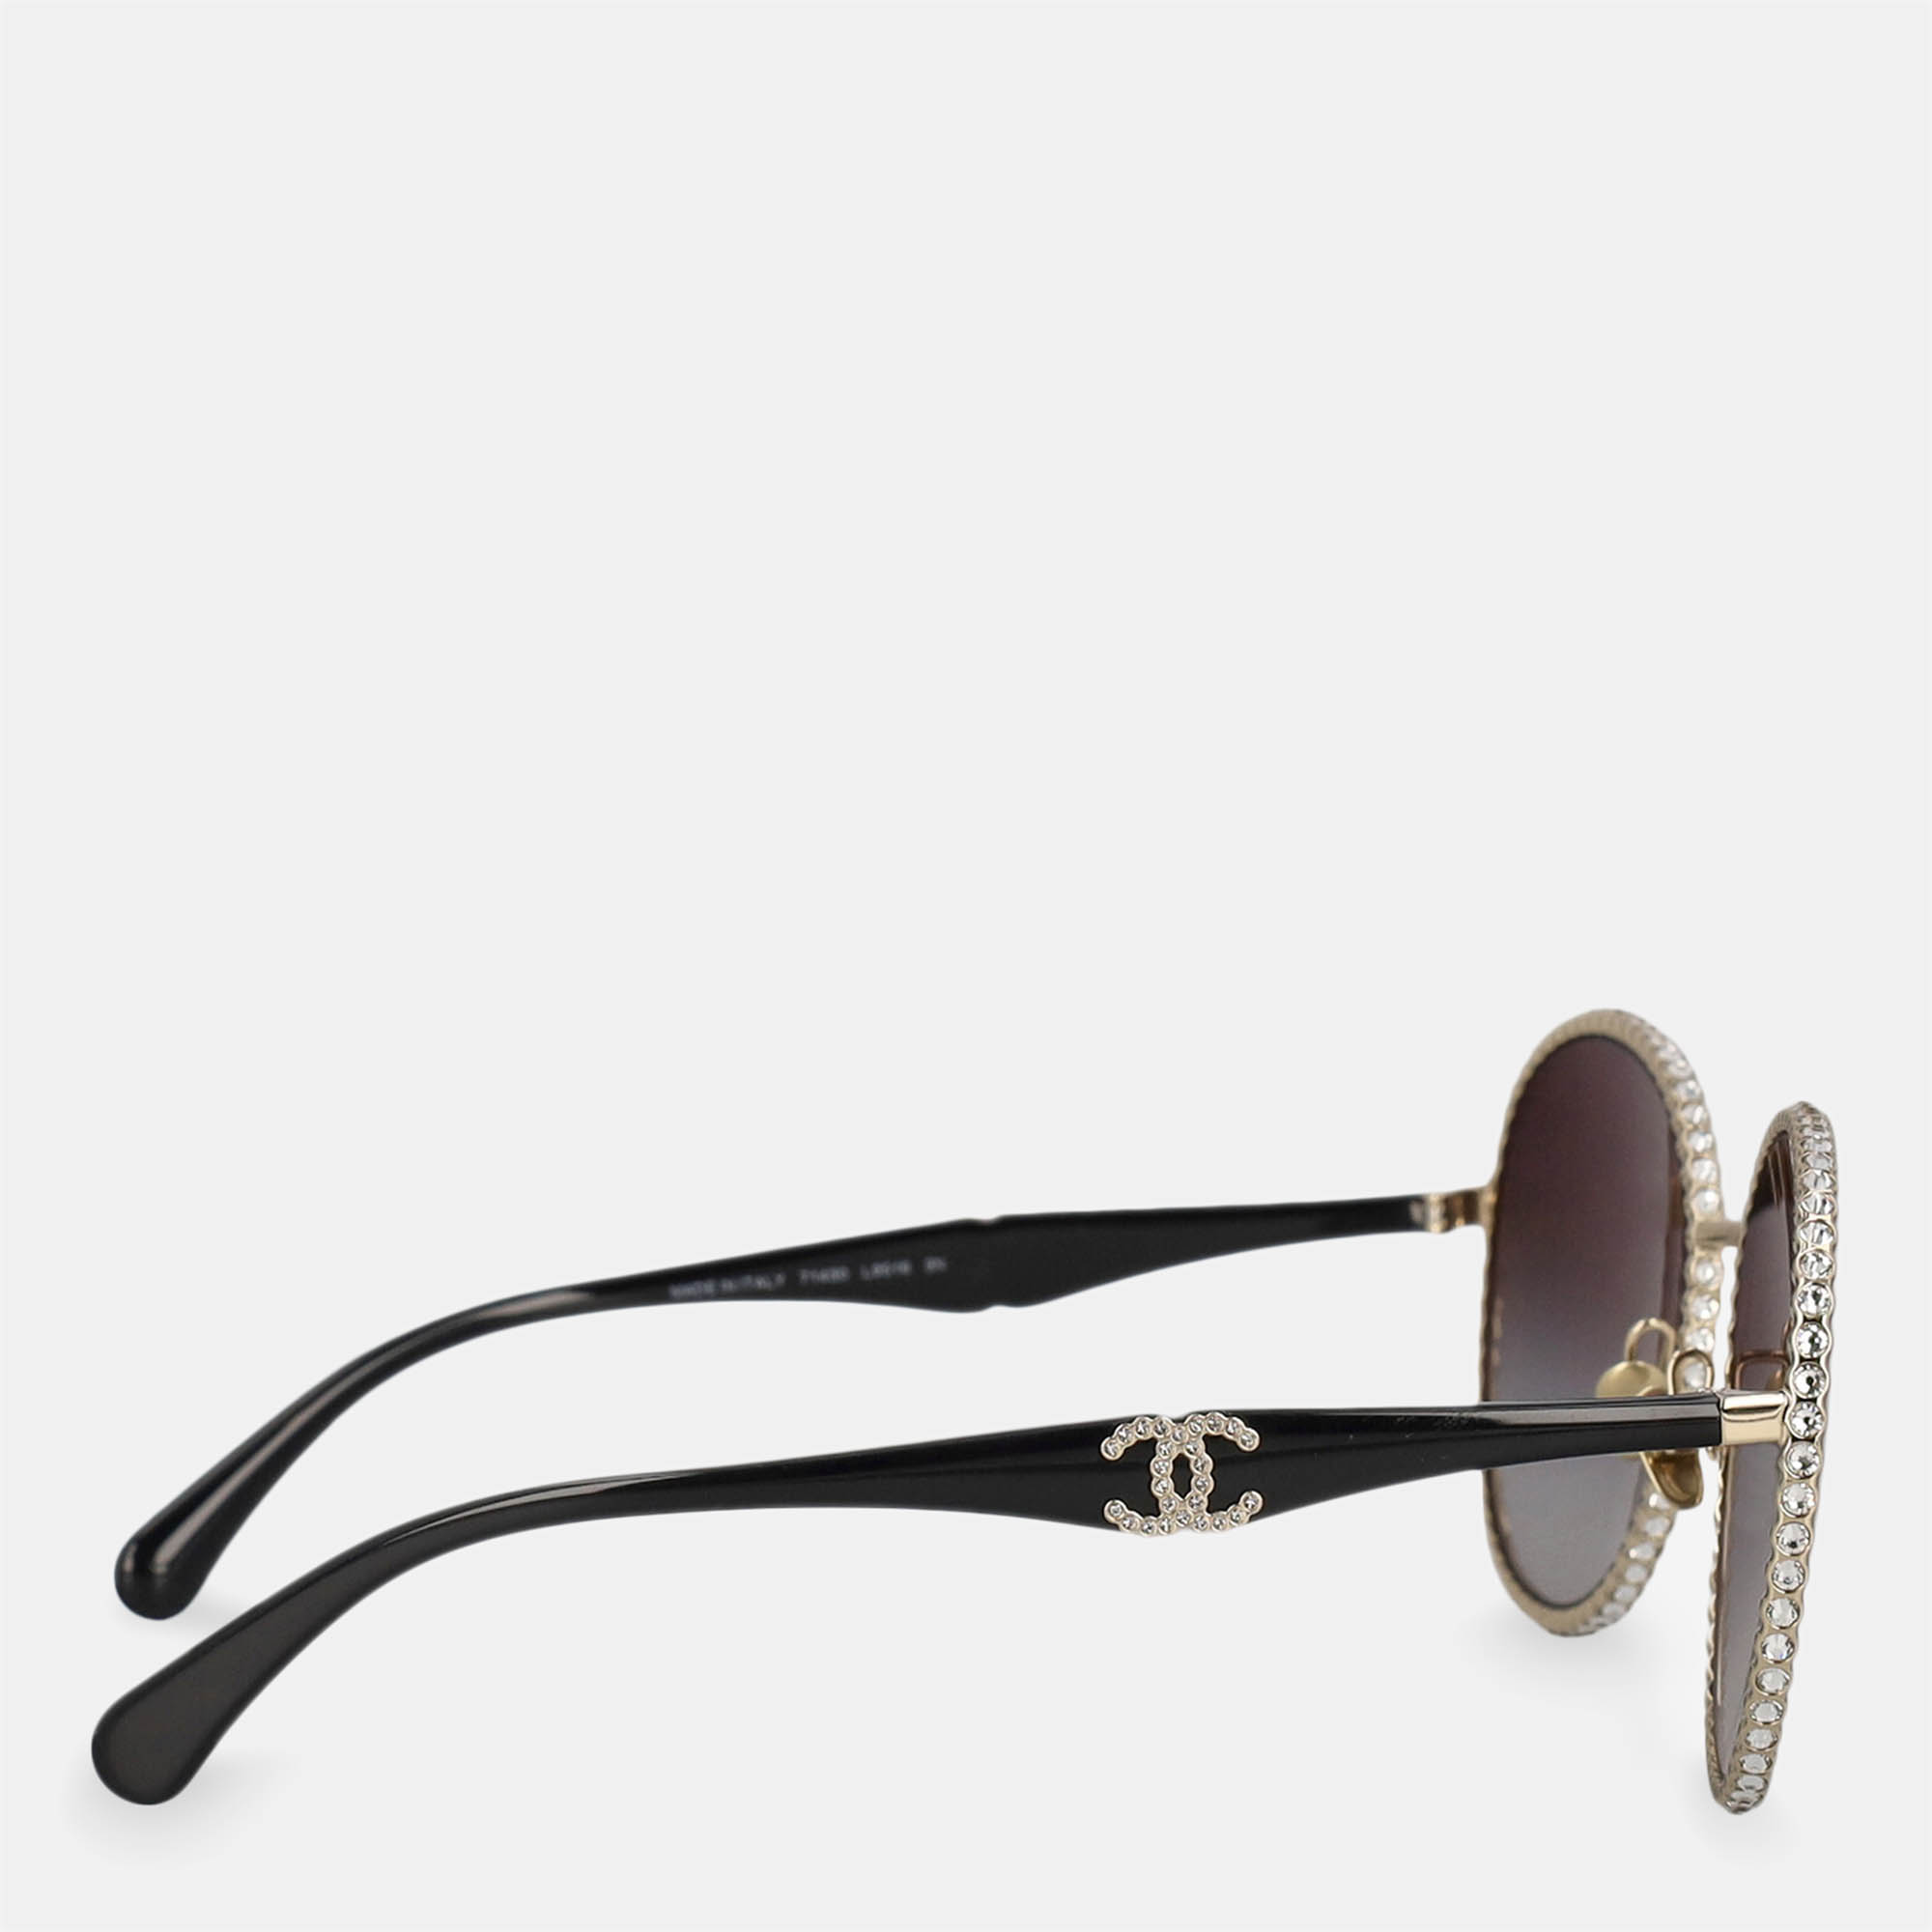 Chanel  Women's Metal Round Frame Sunglasses - Black - One Size